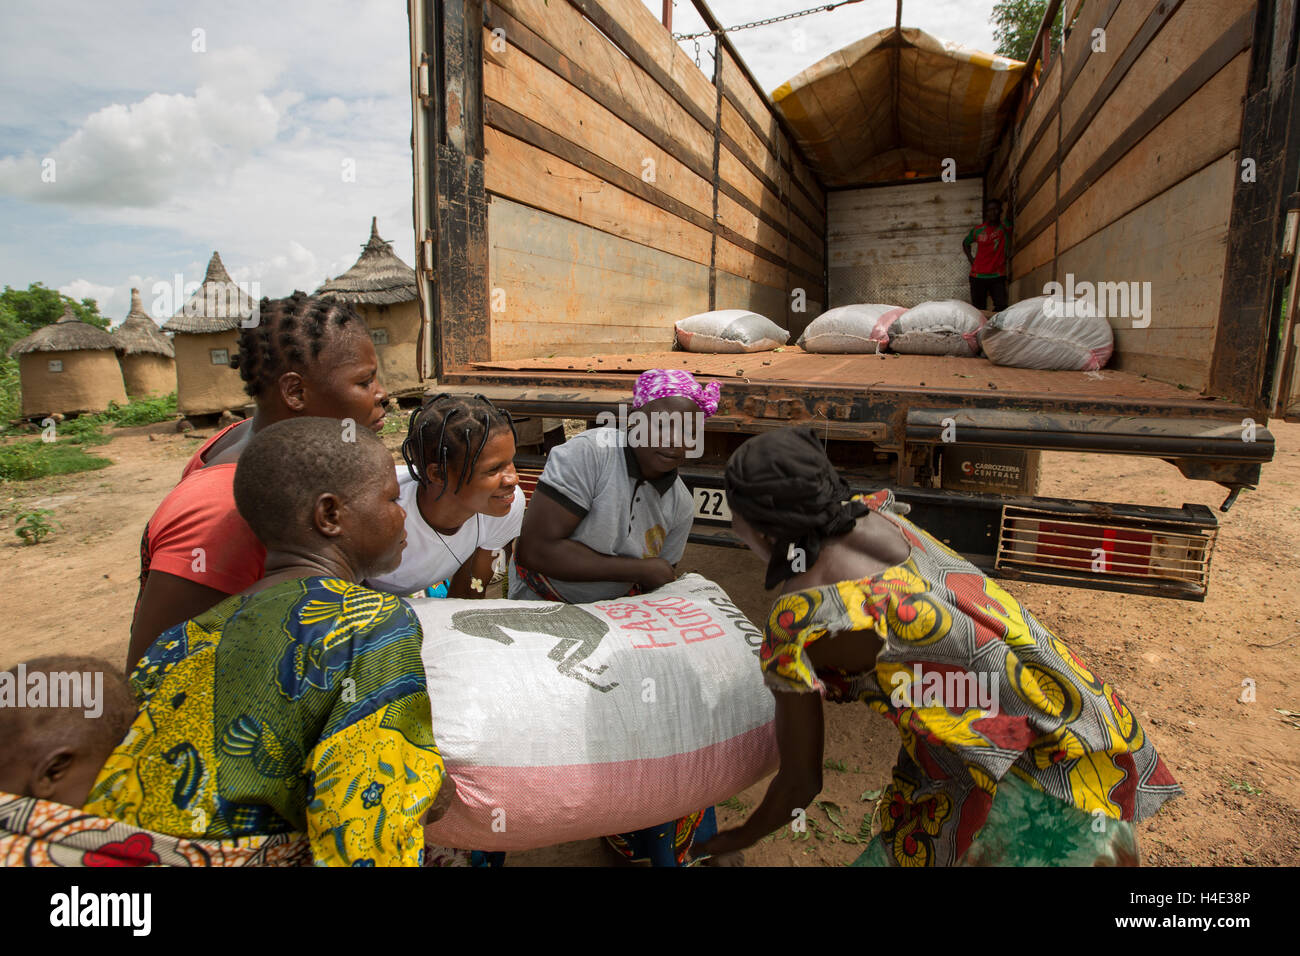 Bags of shea nuts are loaded on to a lorry going to a shea butter fair trade production centre in Burkina Faso, West Africa. Stock Photo